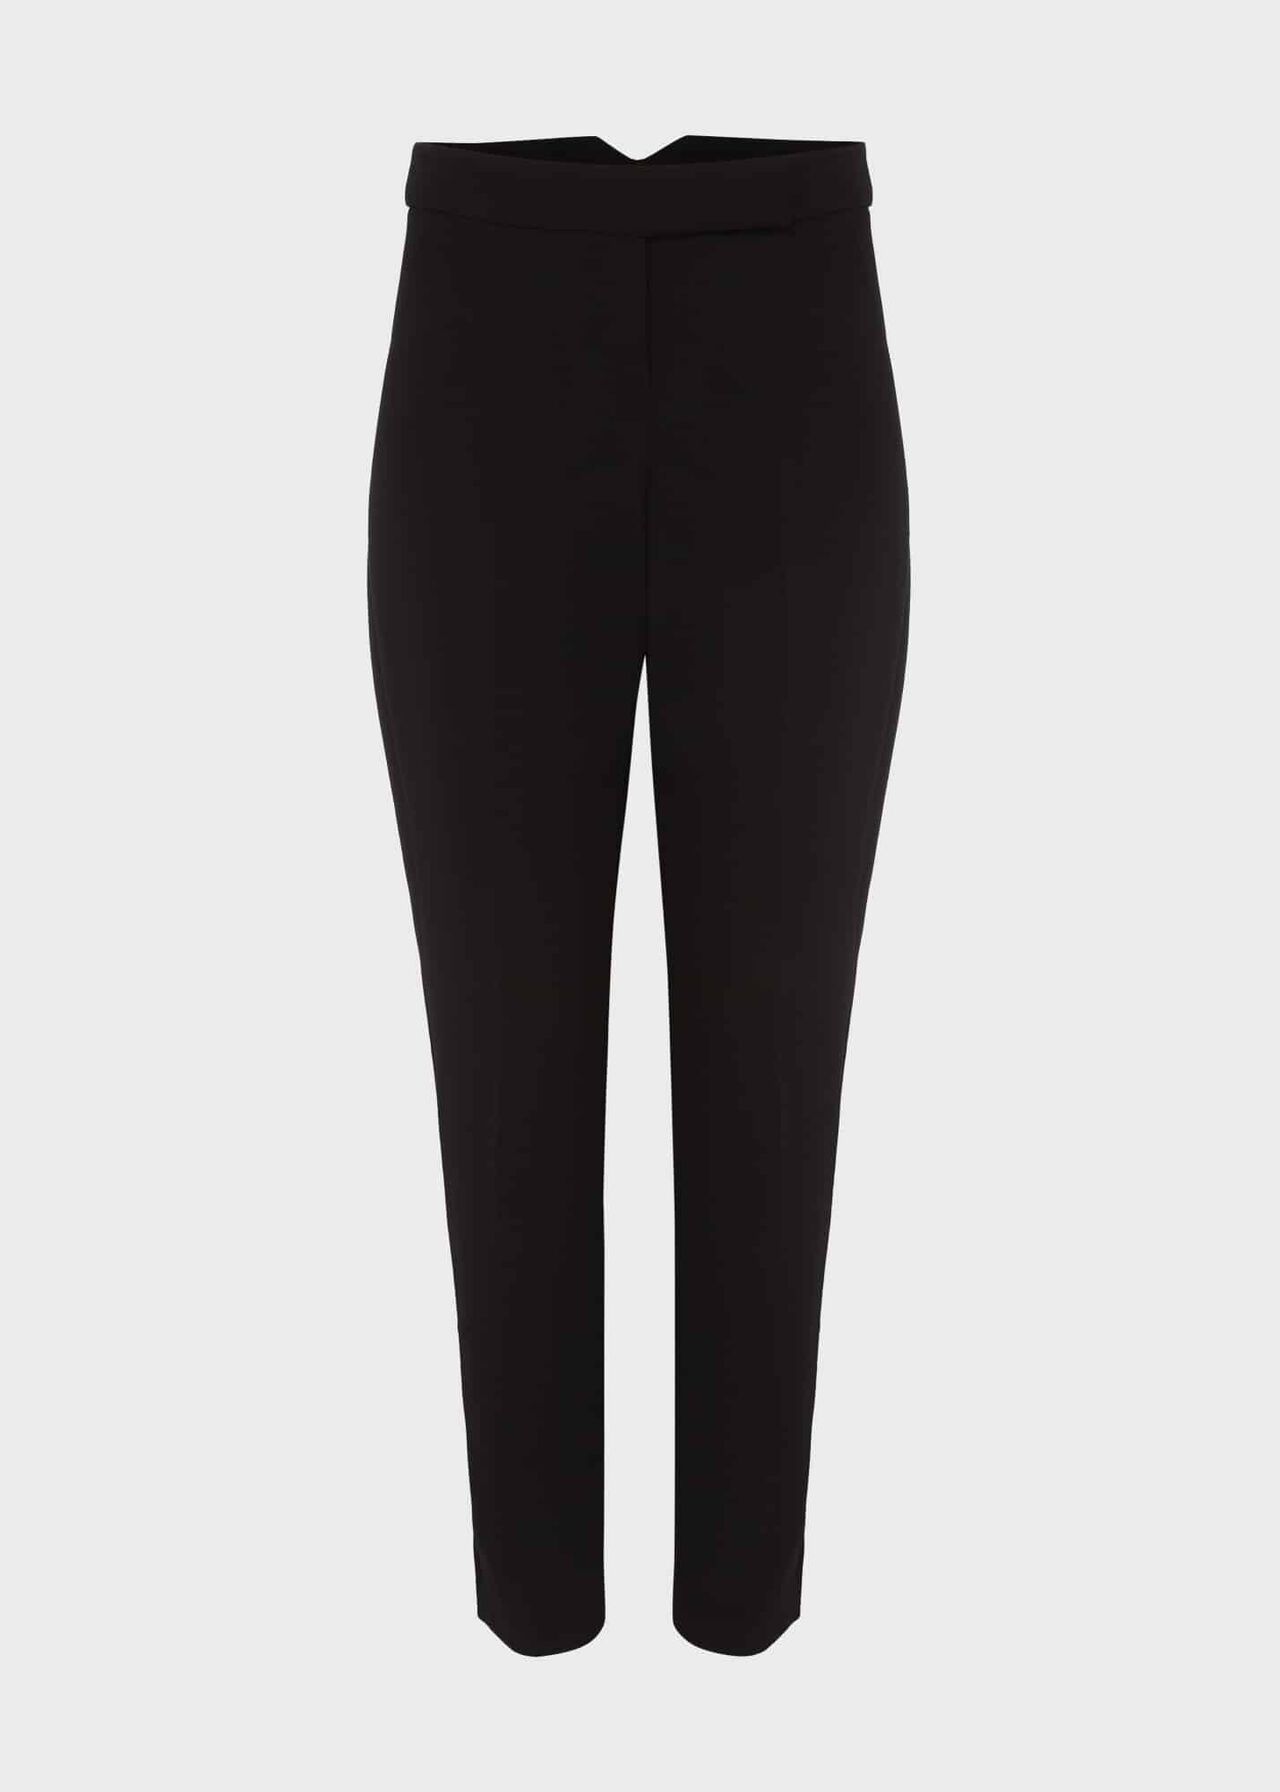 Ophelia Slim Trousers With Stretch, Black, hi-res